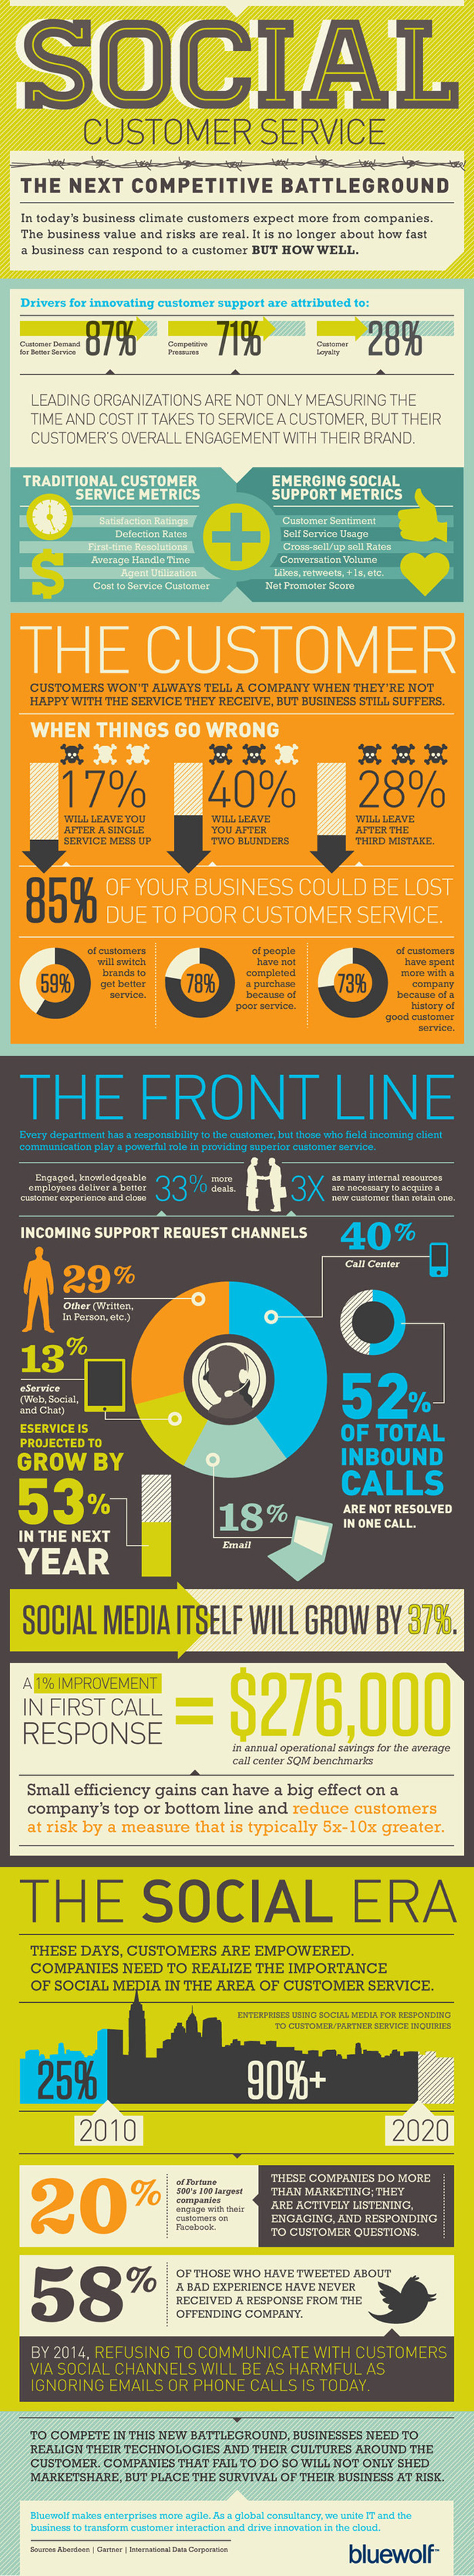 Social Customer Service infographic